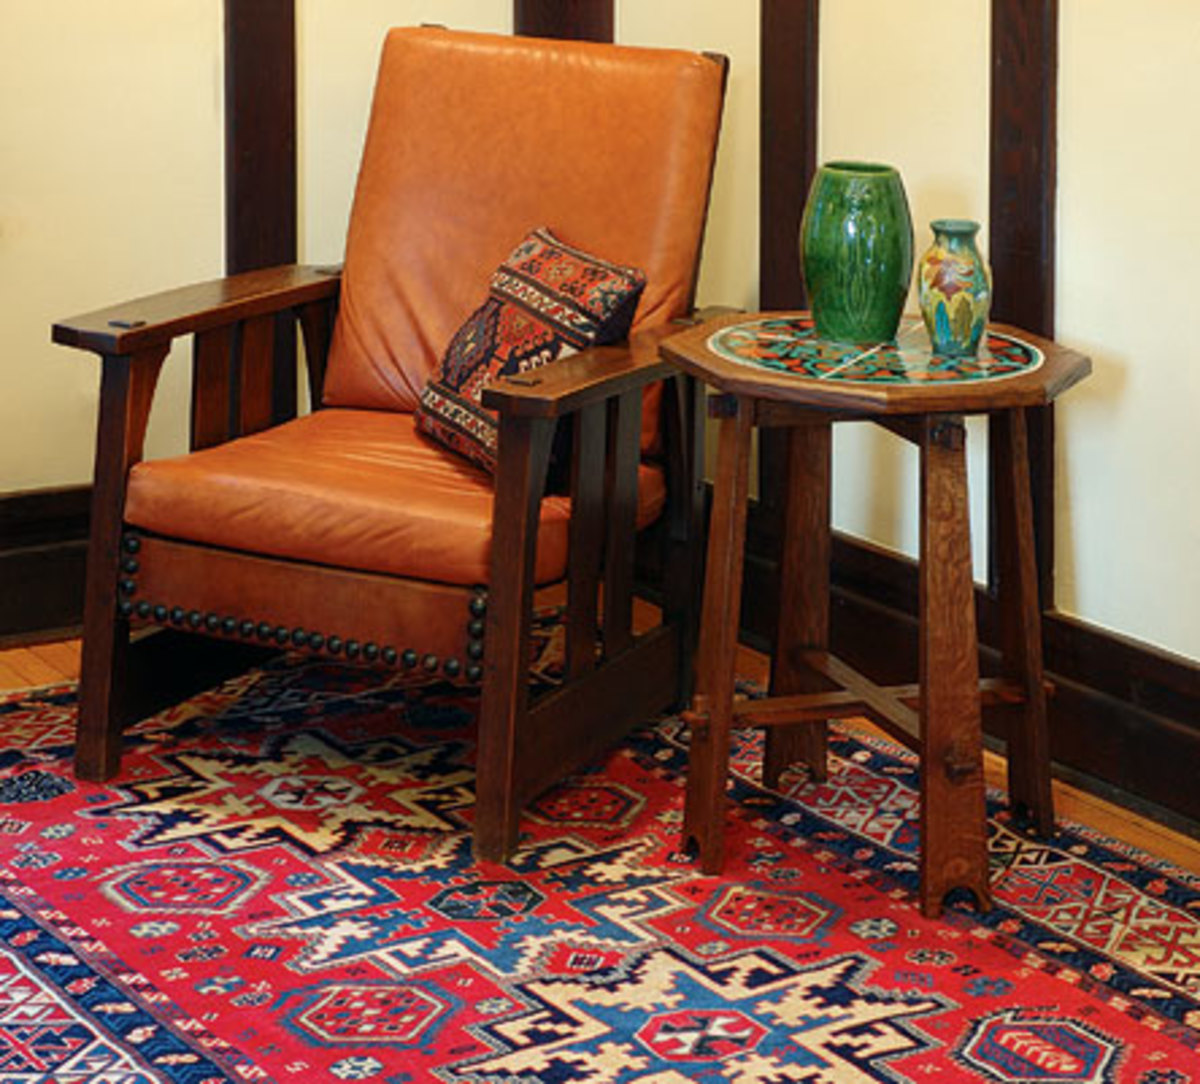 Colorful Caucasian rugs are inspired by Persian and Turkish designs.